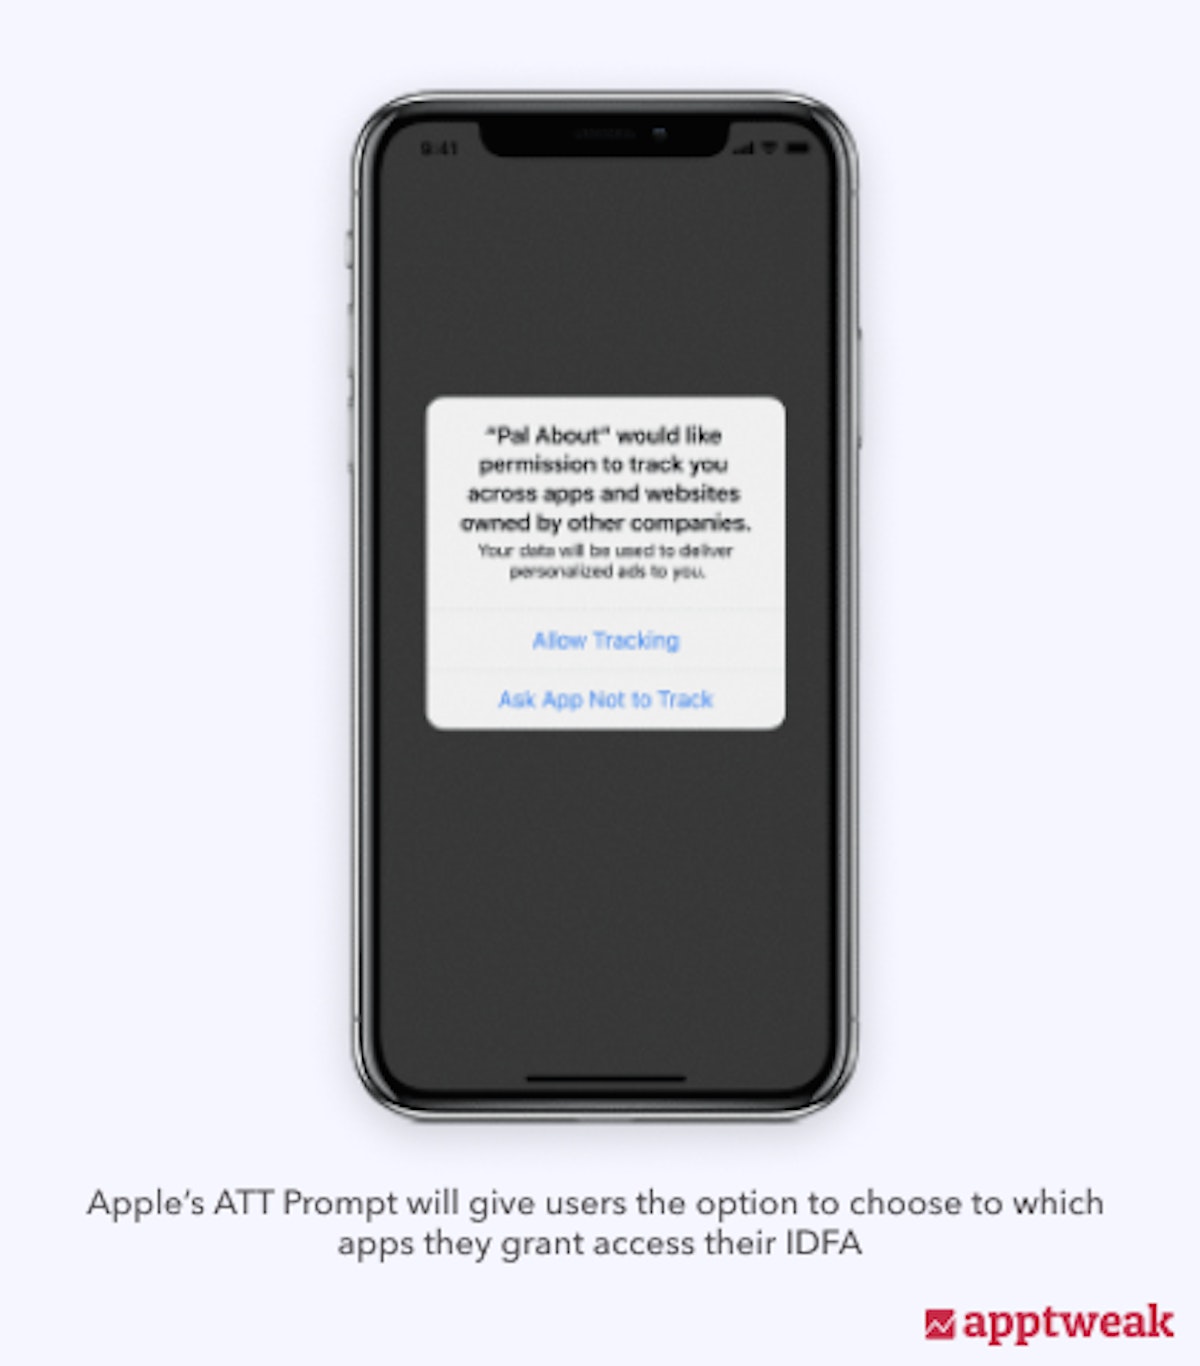 Apple's App Tracking transparency prompt